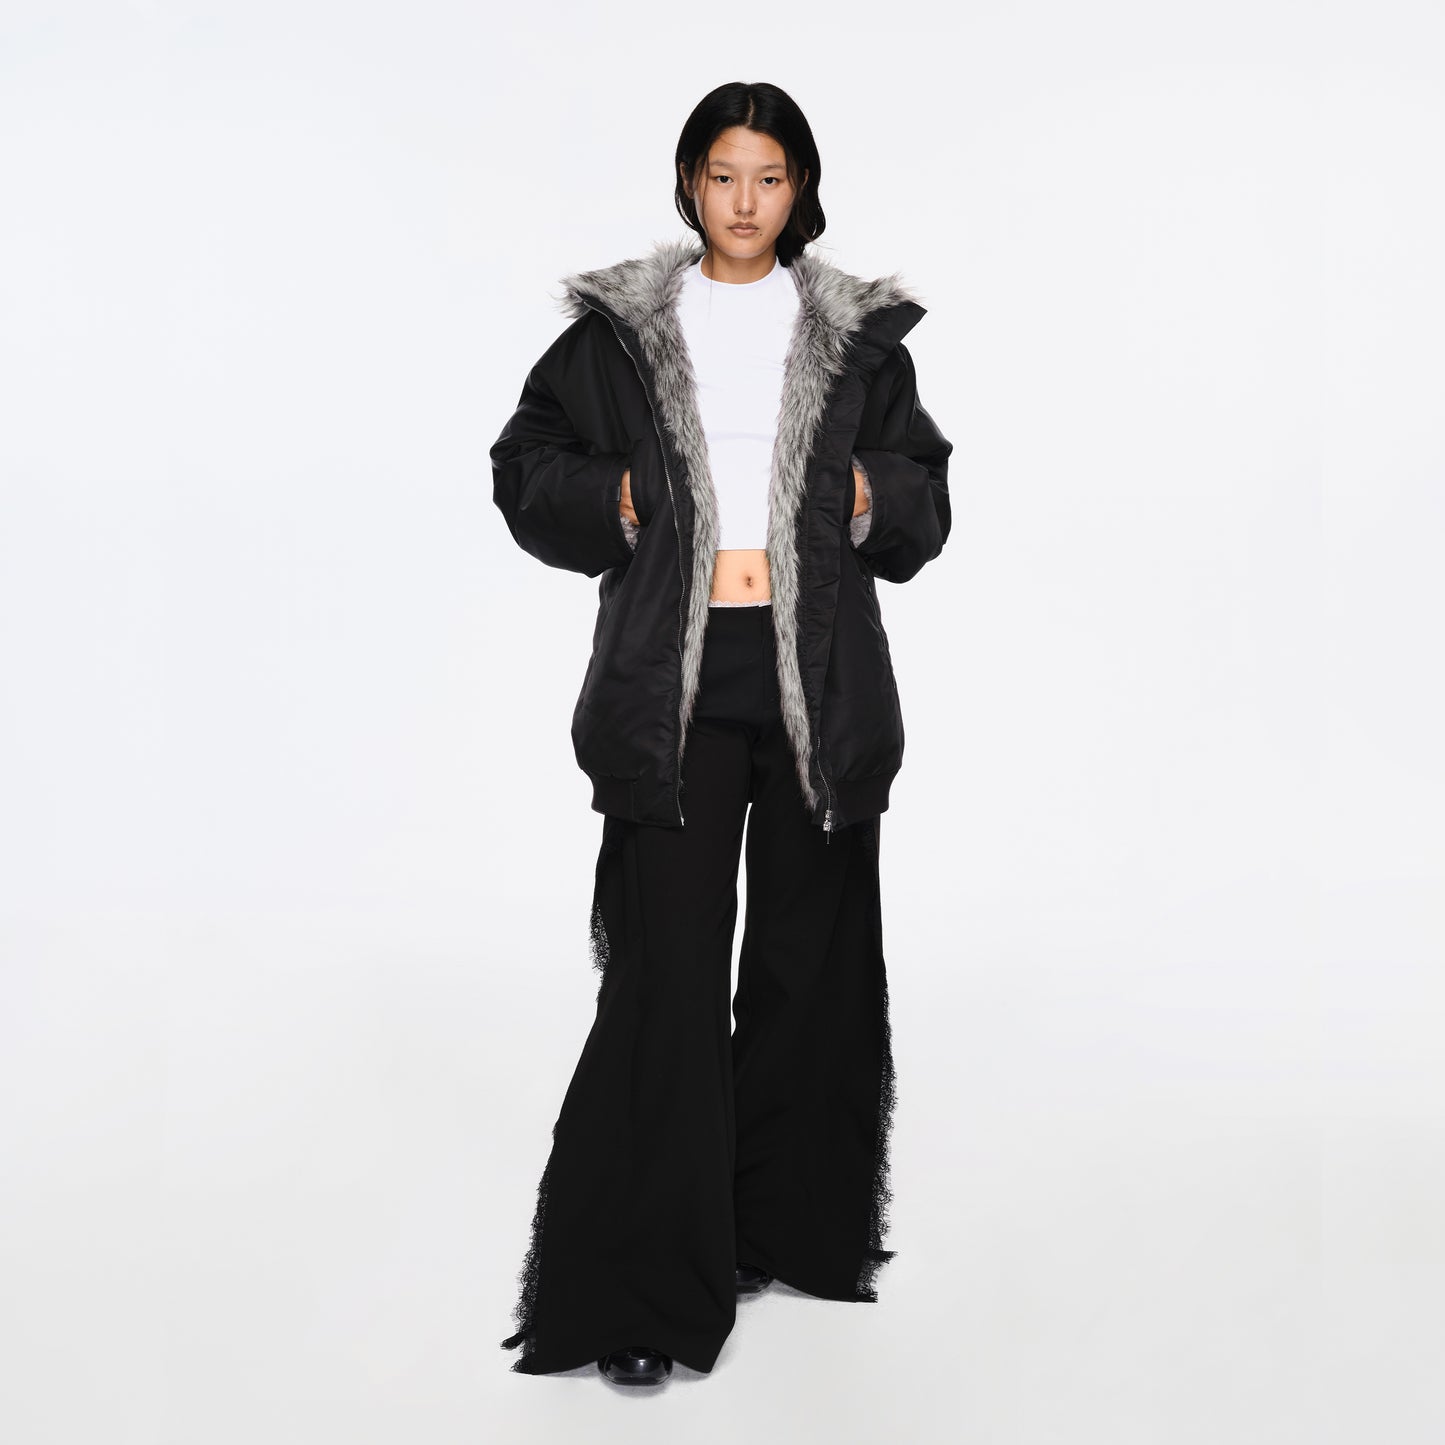 The Oversized Shearling-Lined Bomber Jacket